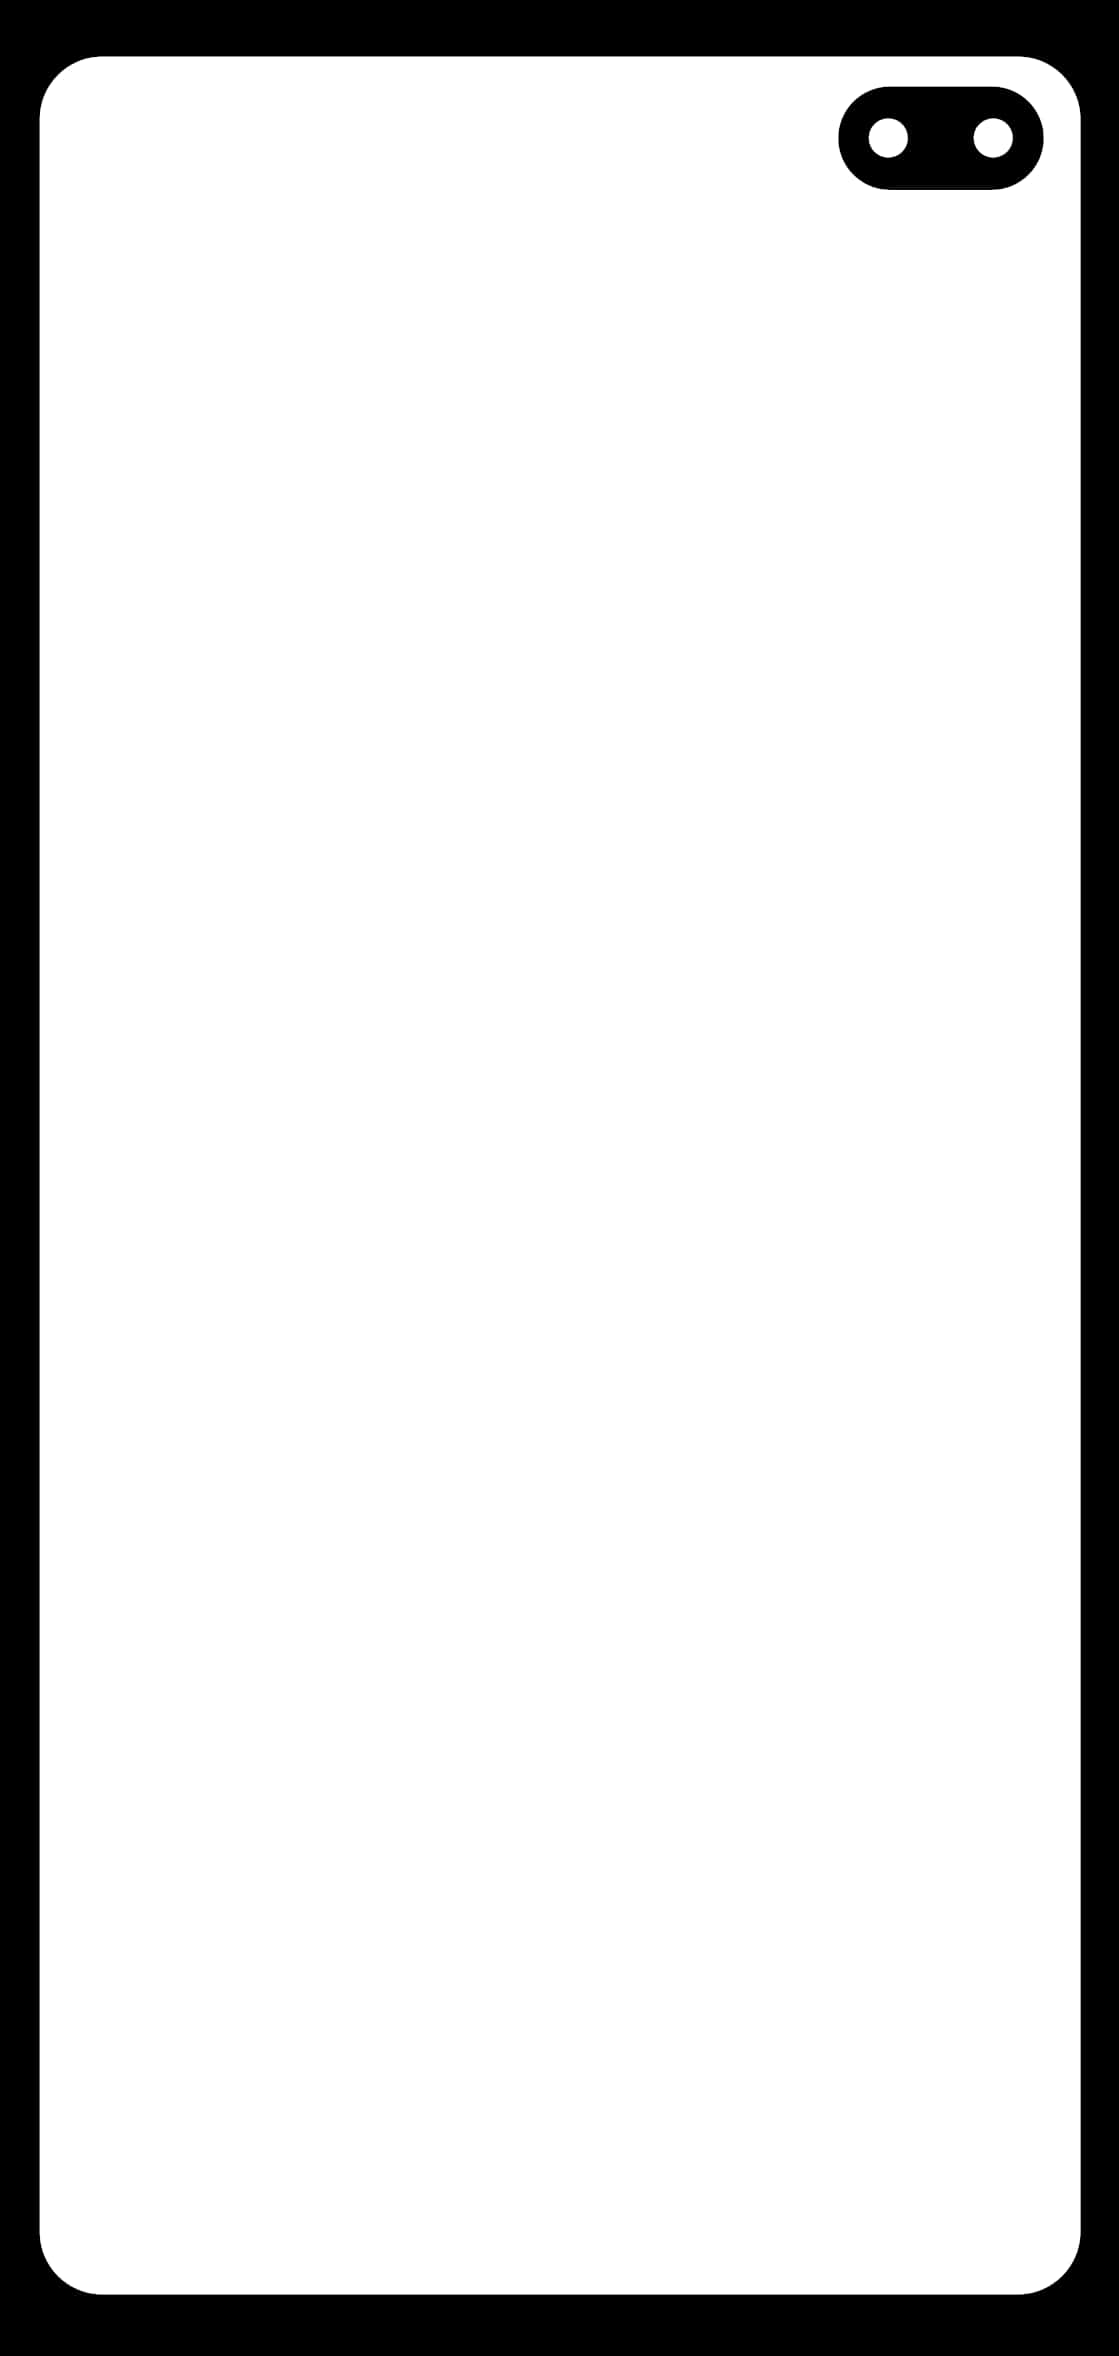 Blank Smartphone Screen Template PNG